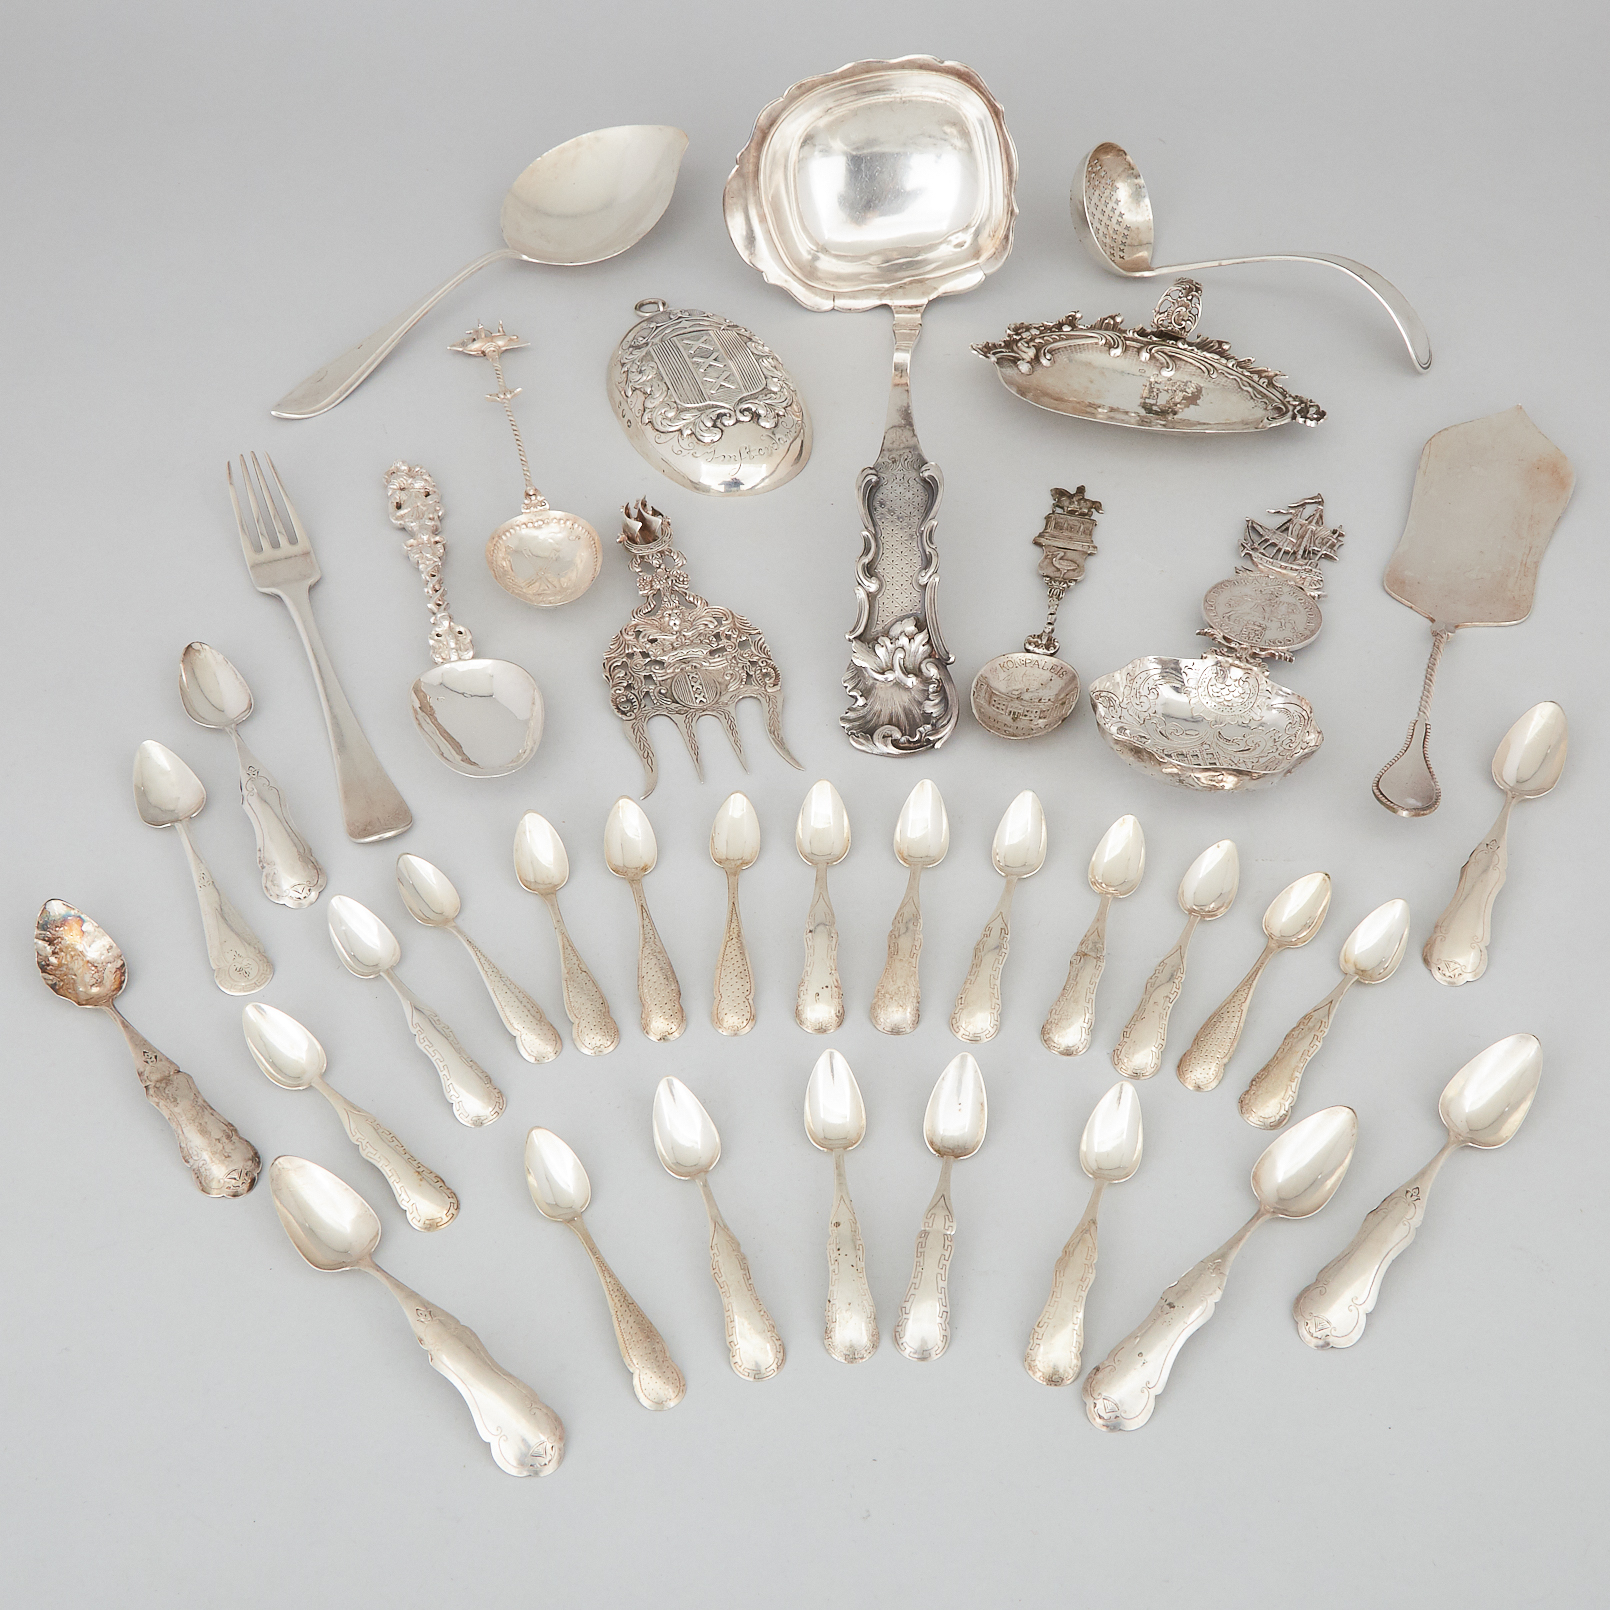 Group of Dutch Silver, 19th/20th century